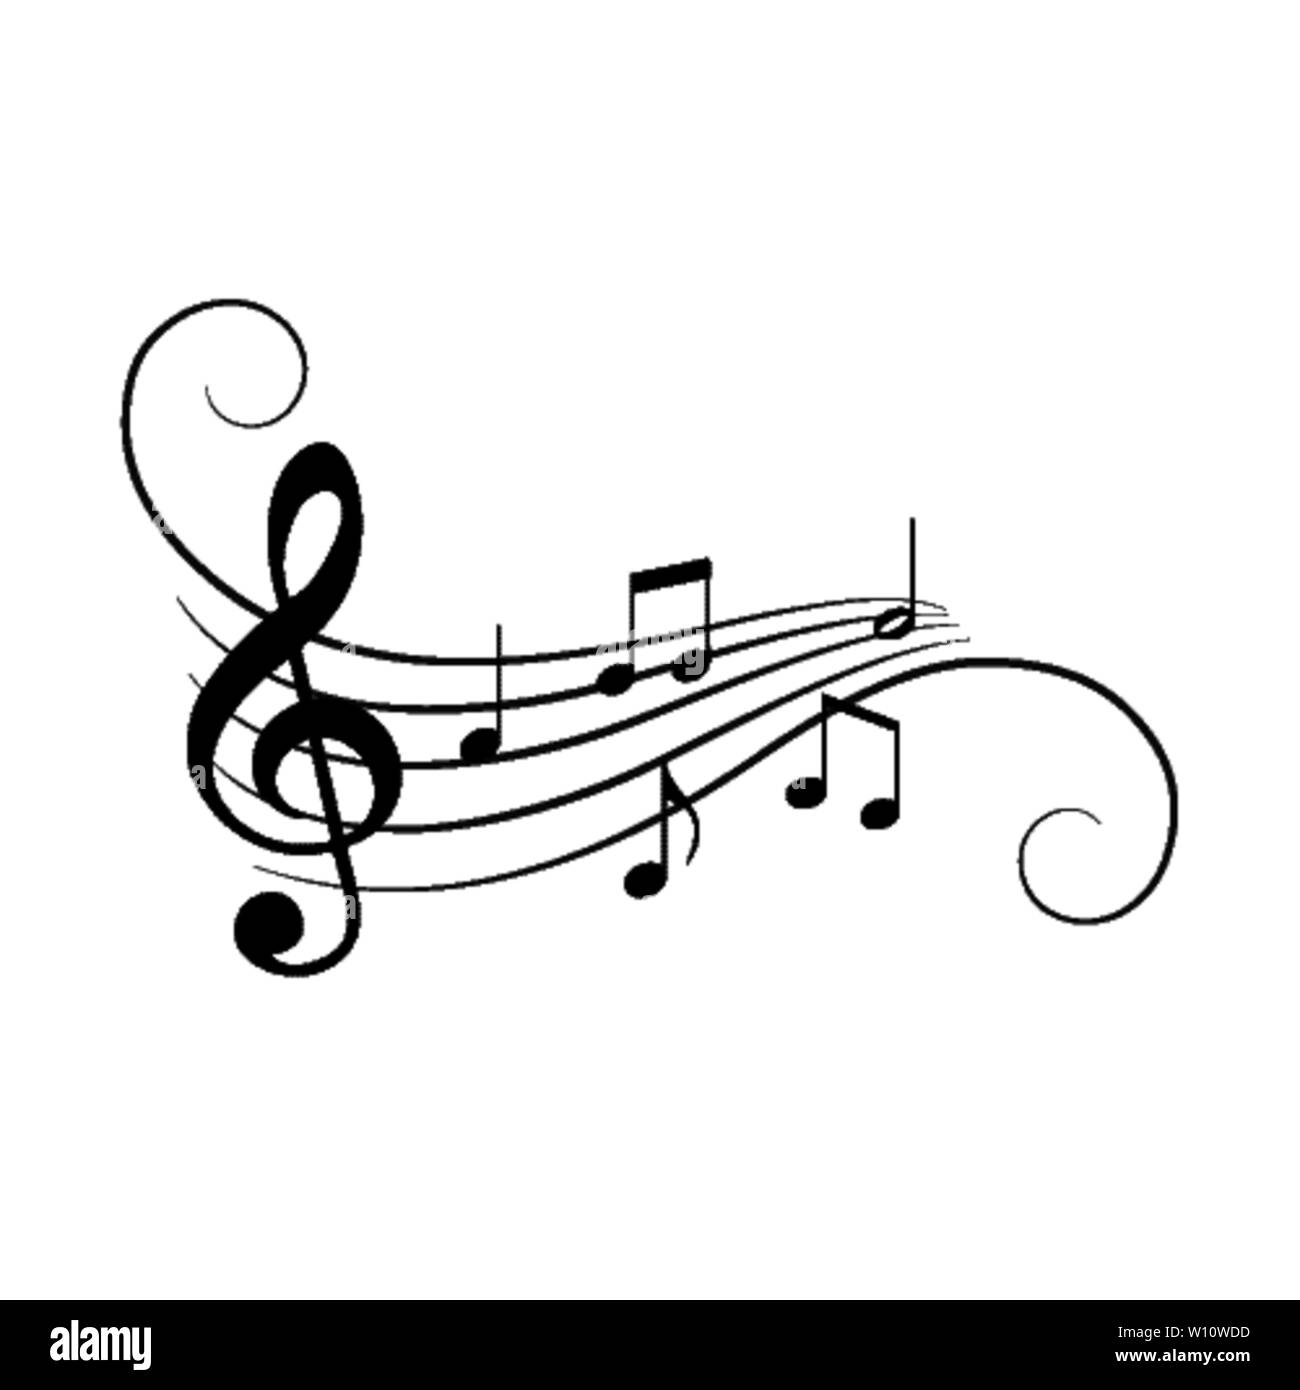 Abstract music background with musical notes Stock Vector